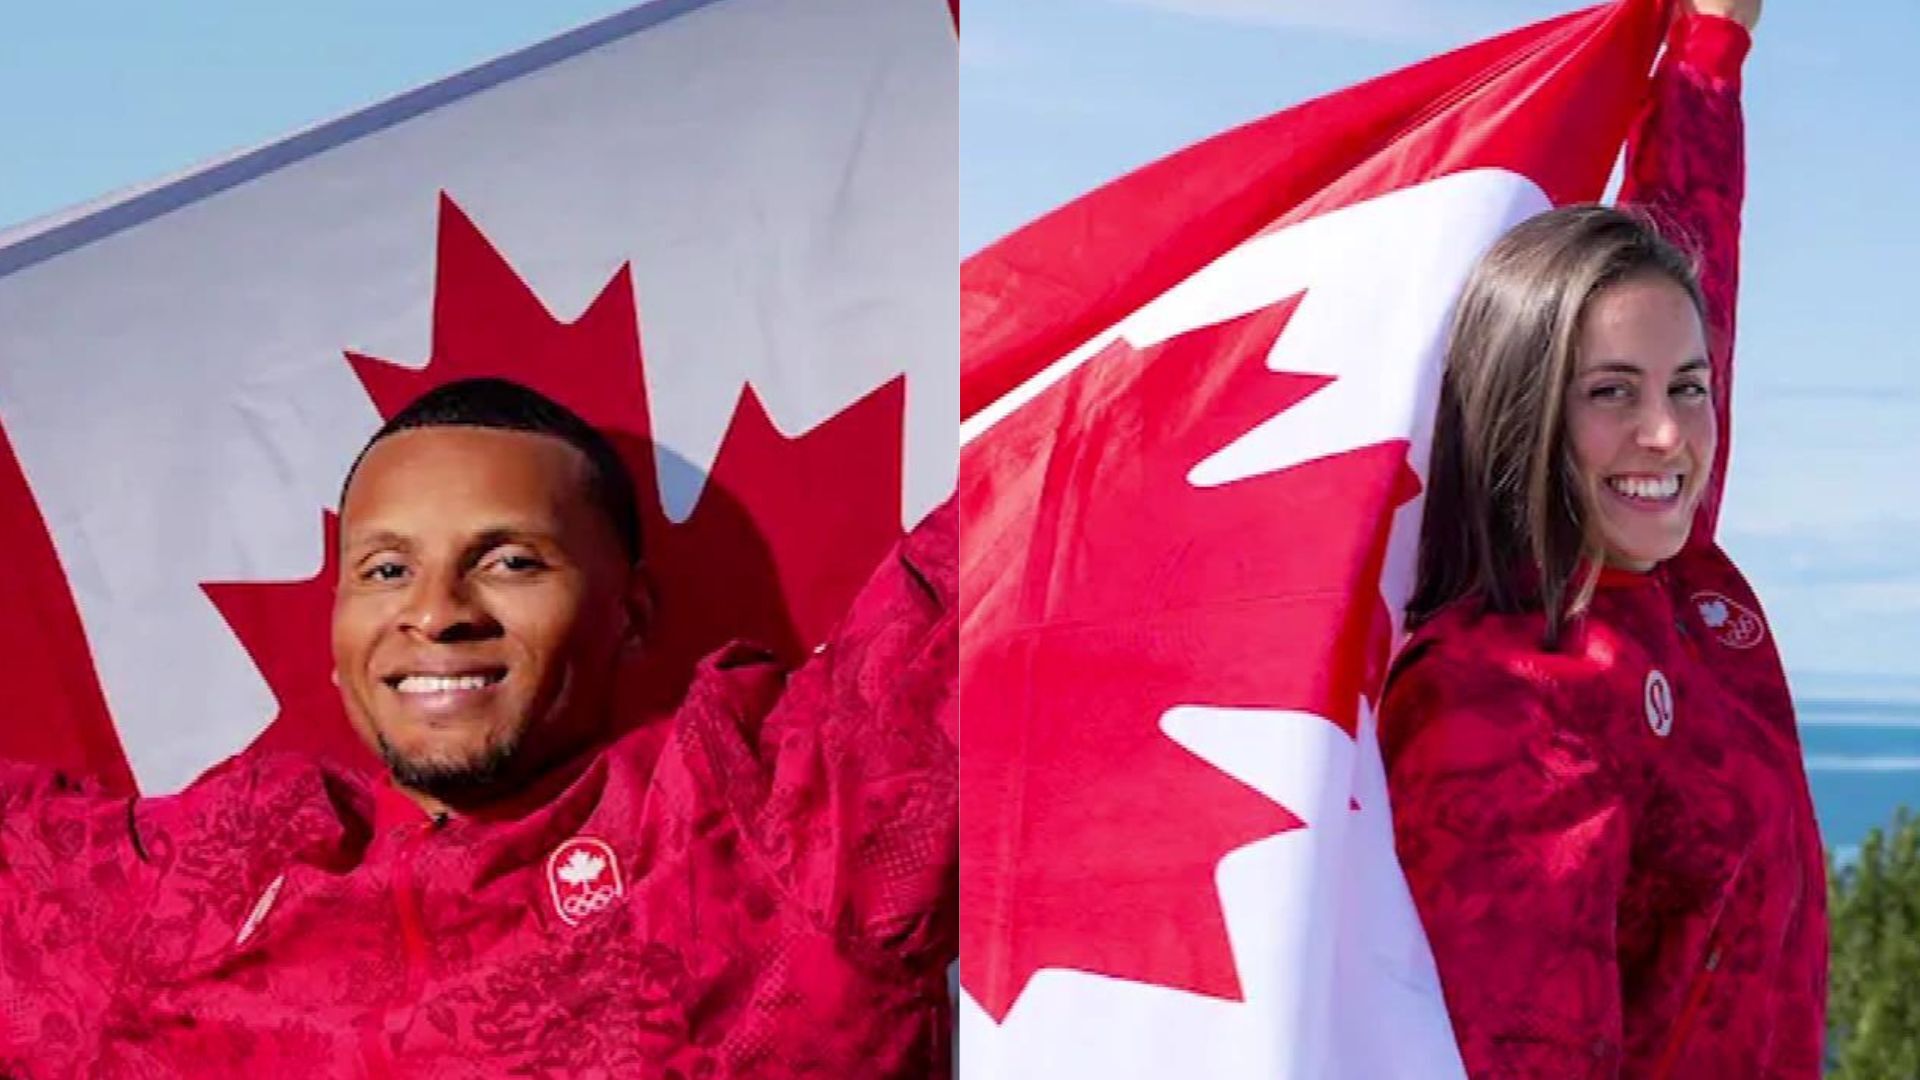 These athletes were chosen to carry the Canadian flag in the Olympics opening ceremony